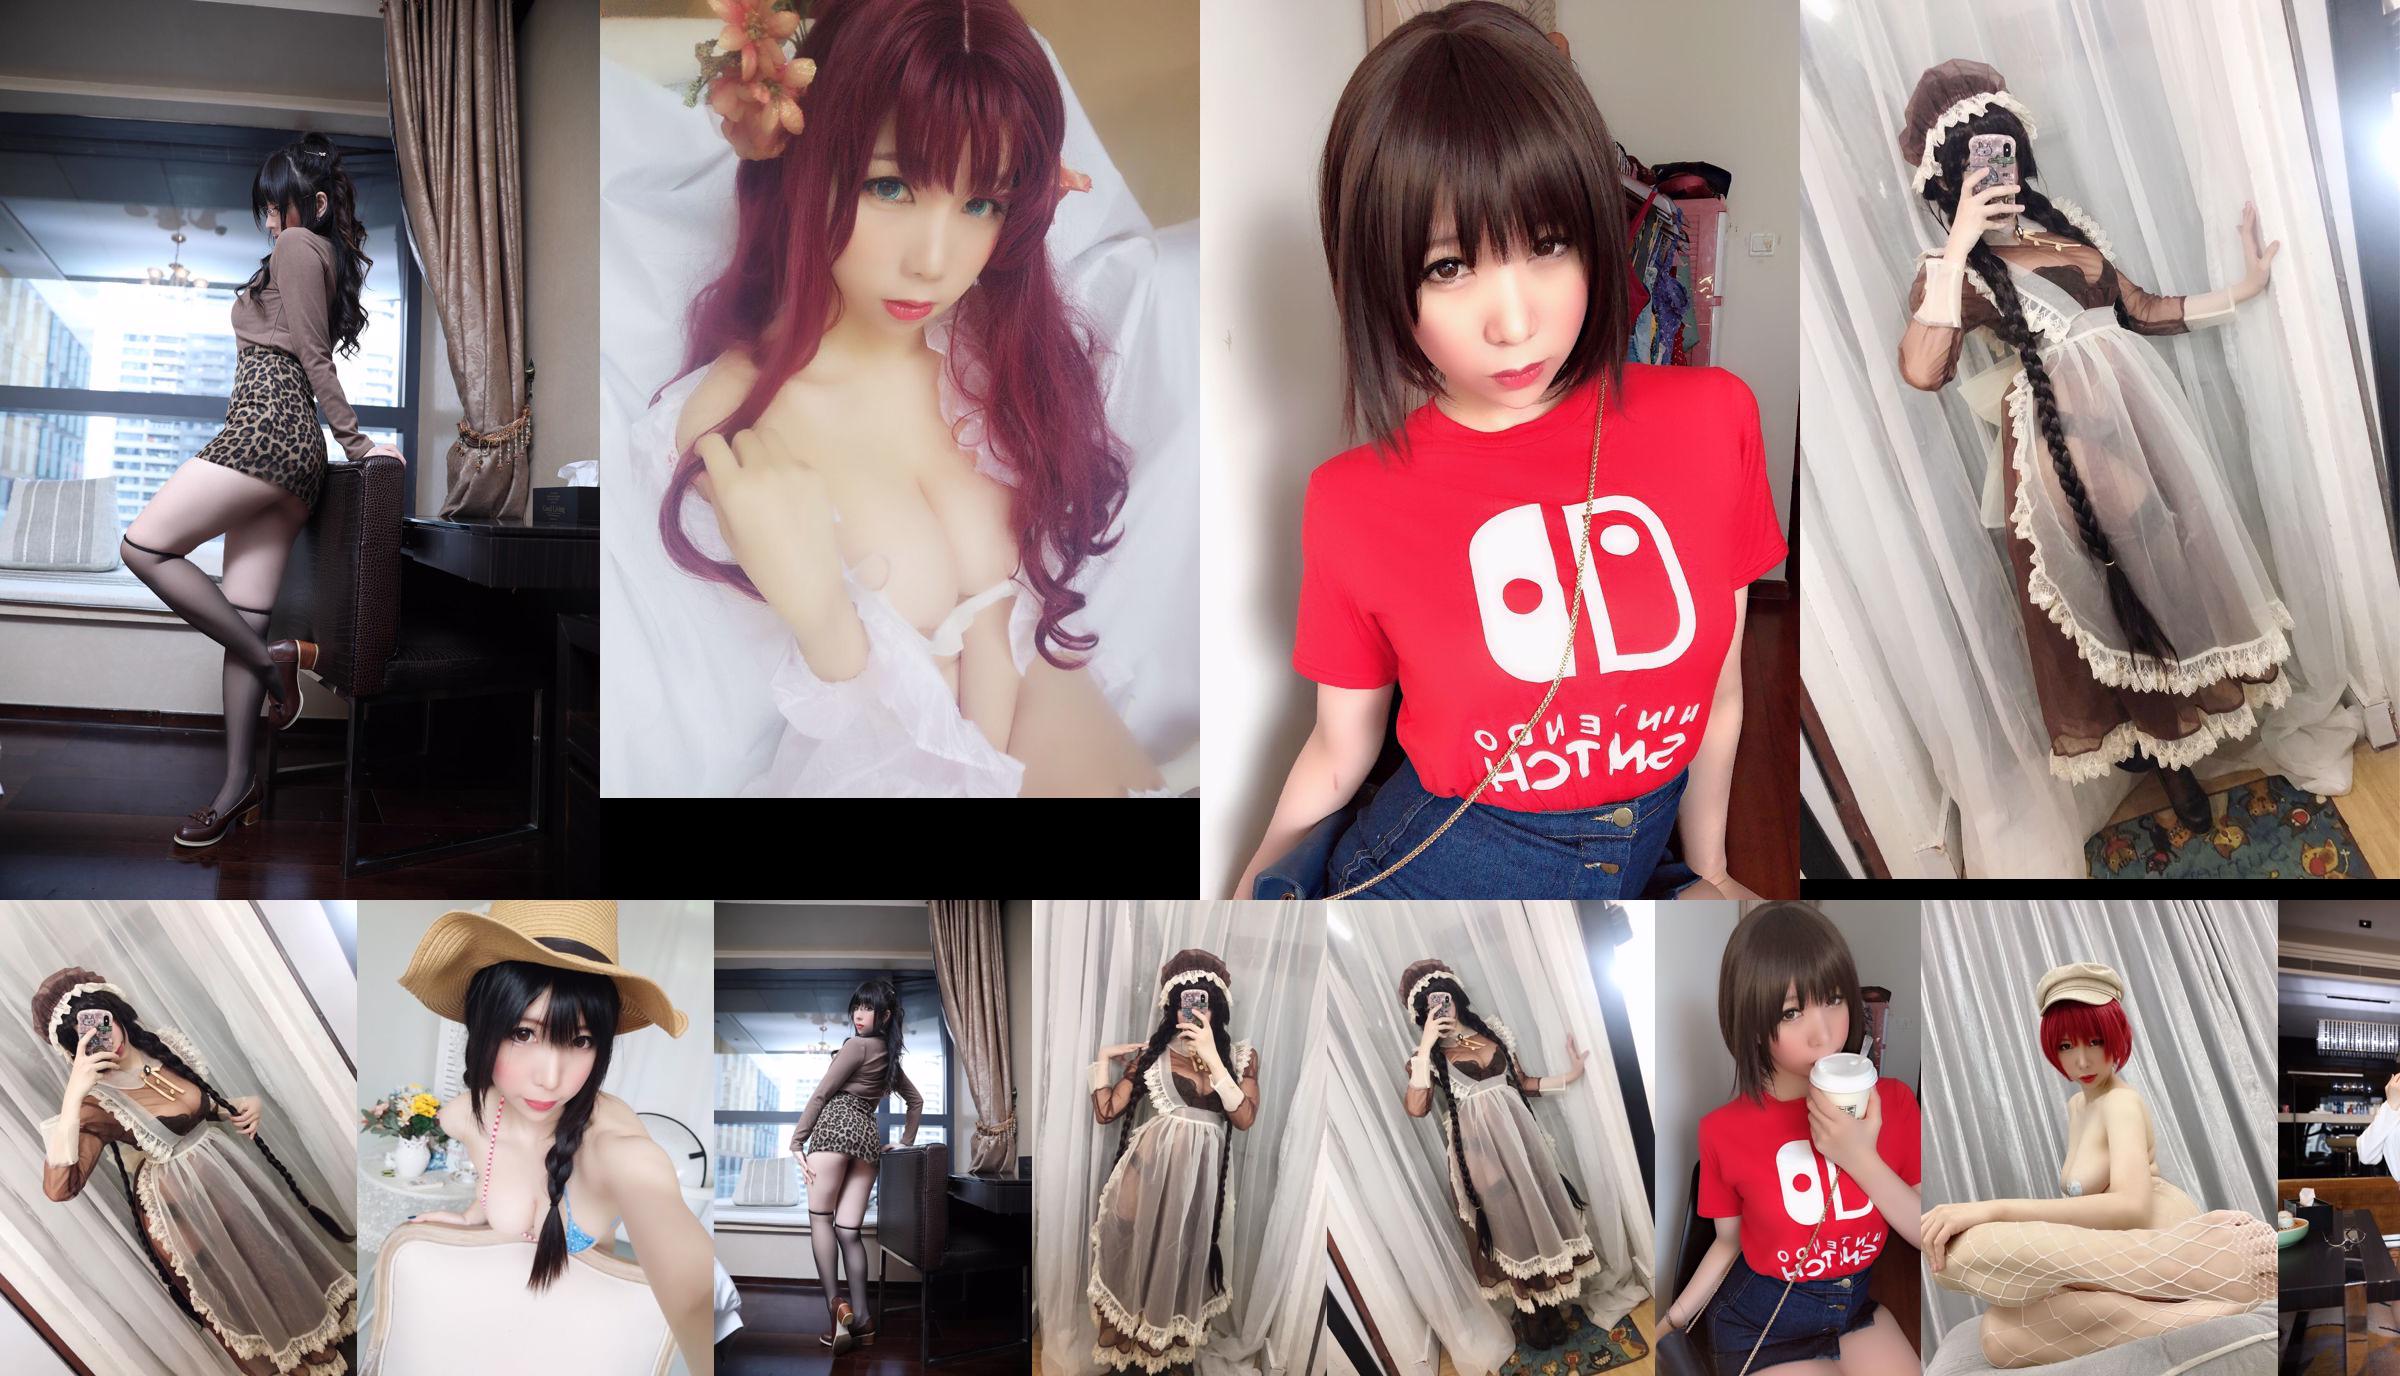 [Net Red COSER] Two-dimensional busty beauty Kano Nozomi - kinky tattoo No.f754b7 Page 1